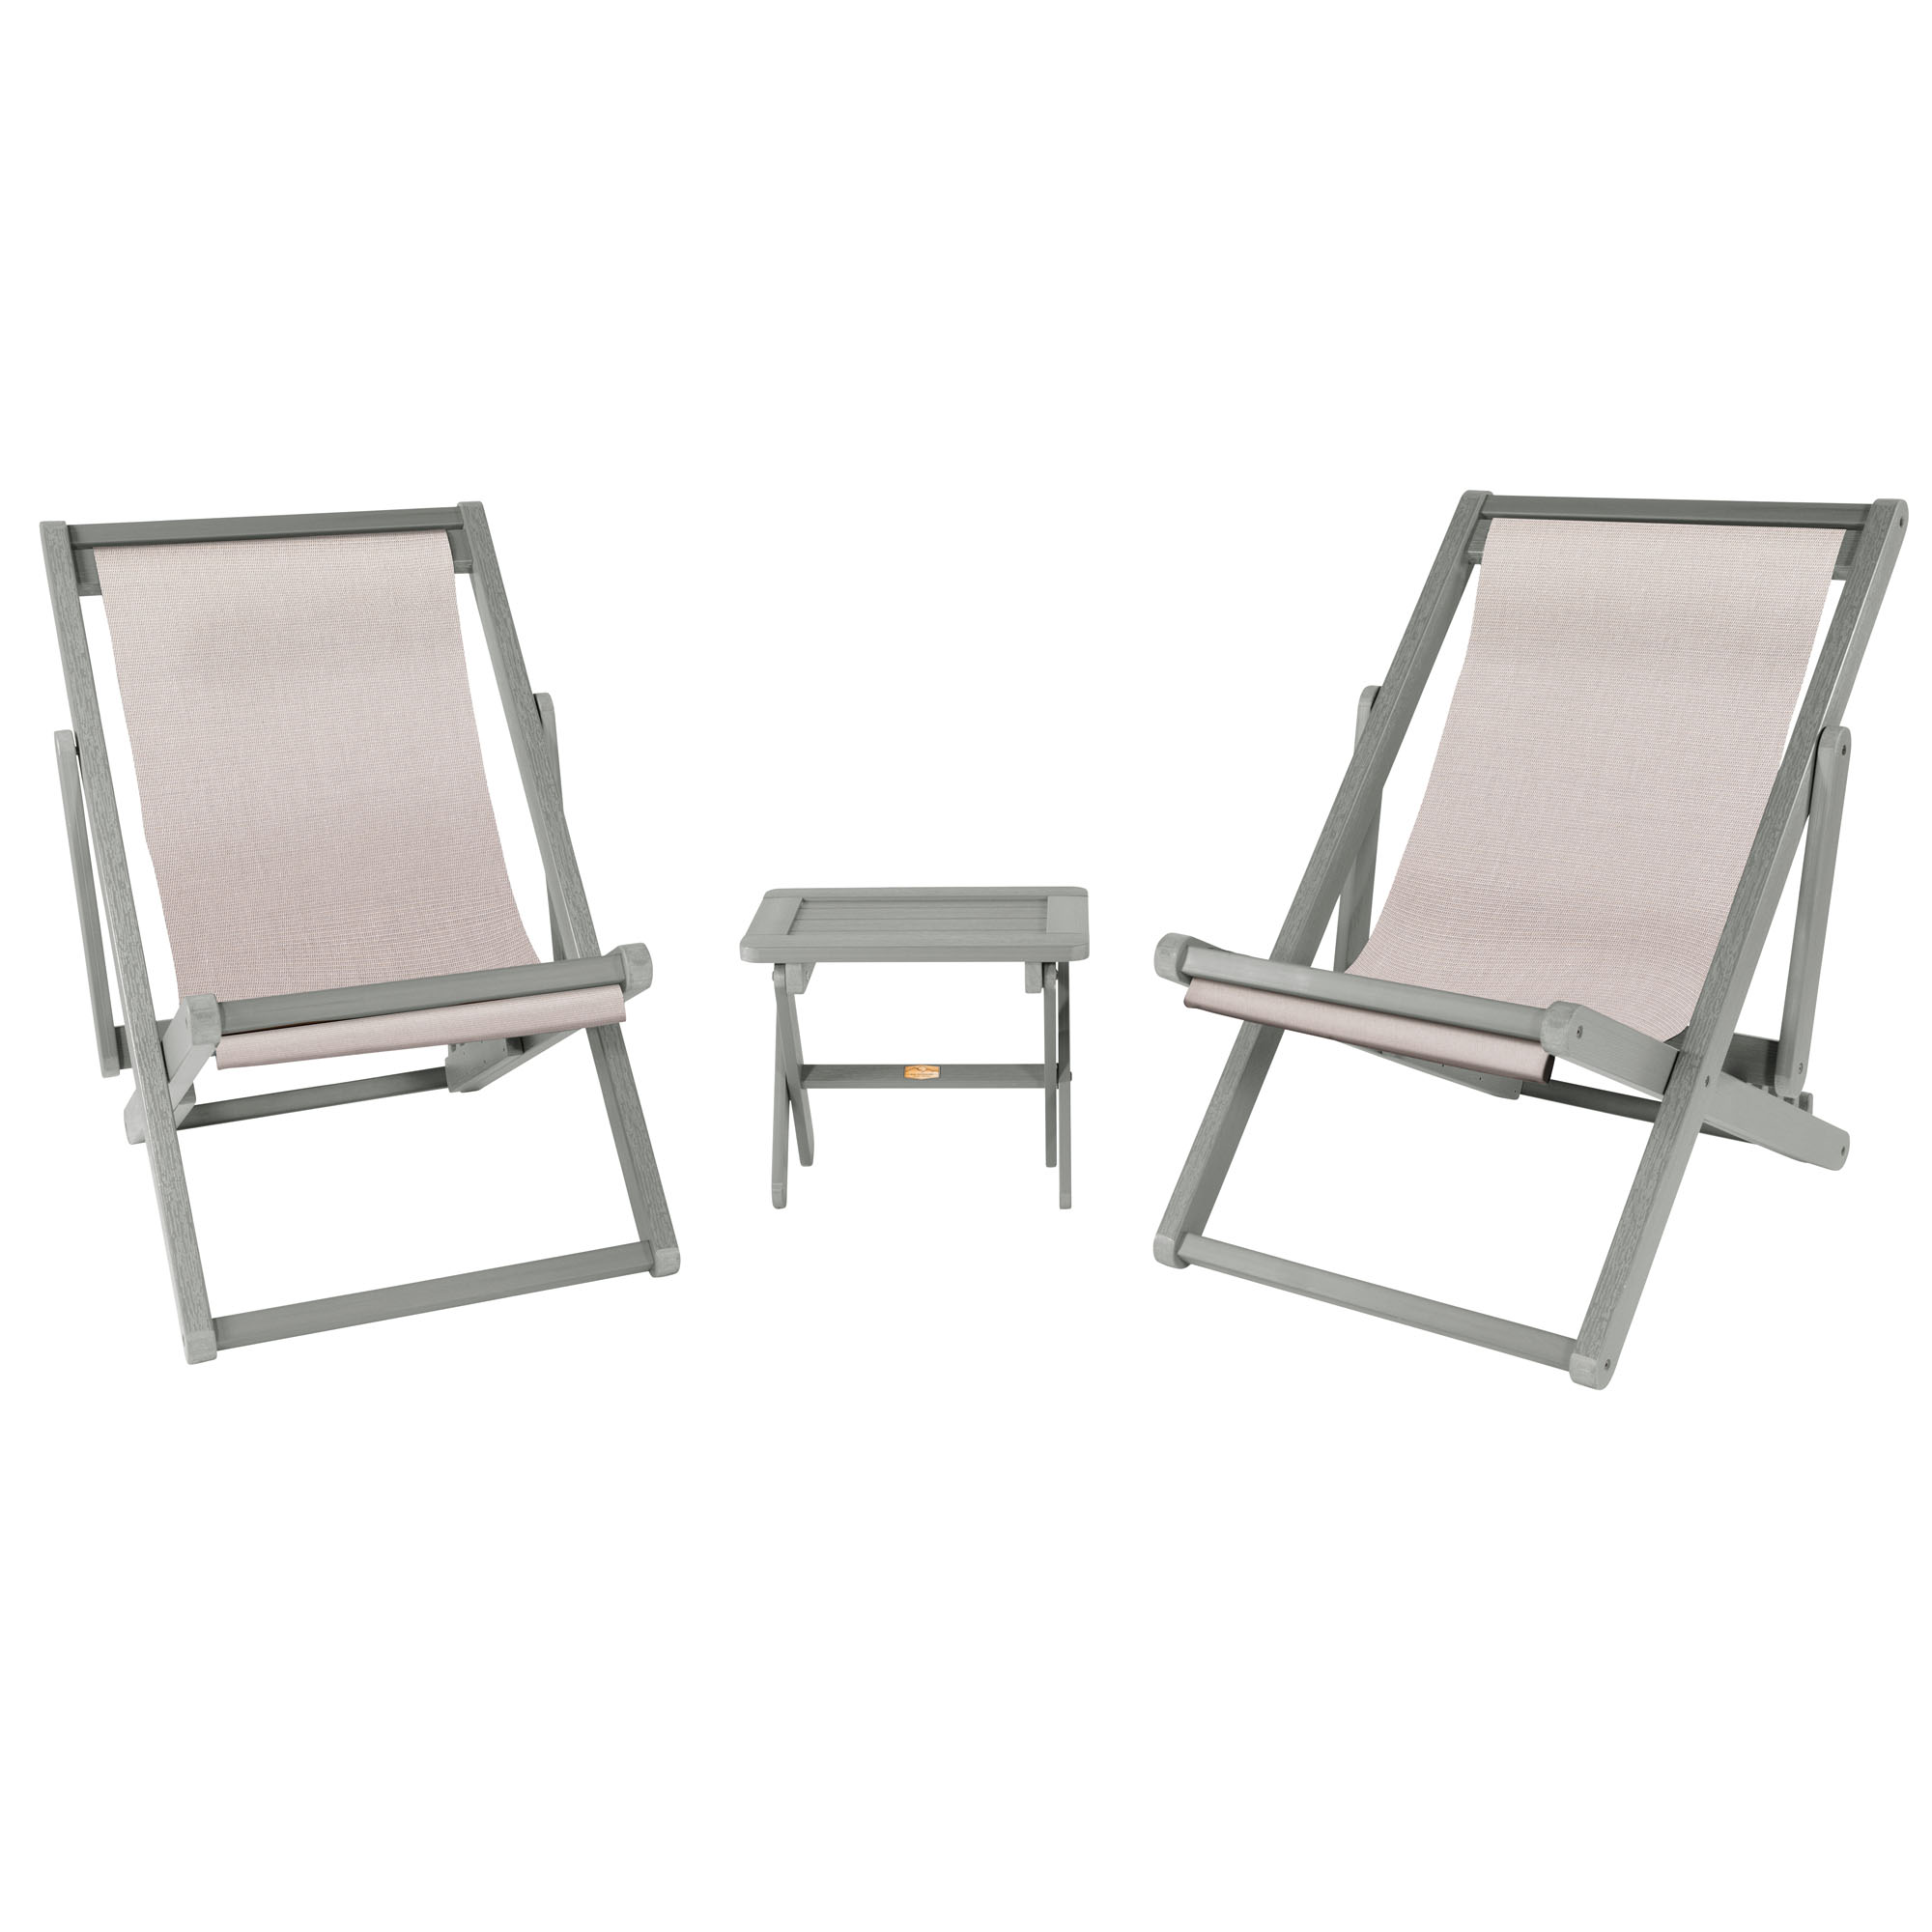 2 Arabella Folding Sling Chairs with Arabella Folding Side Table, Cobblestone - image 1 of 2